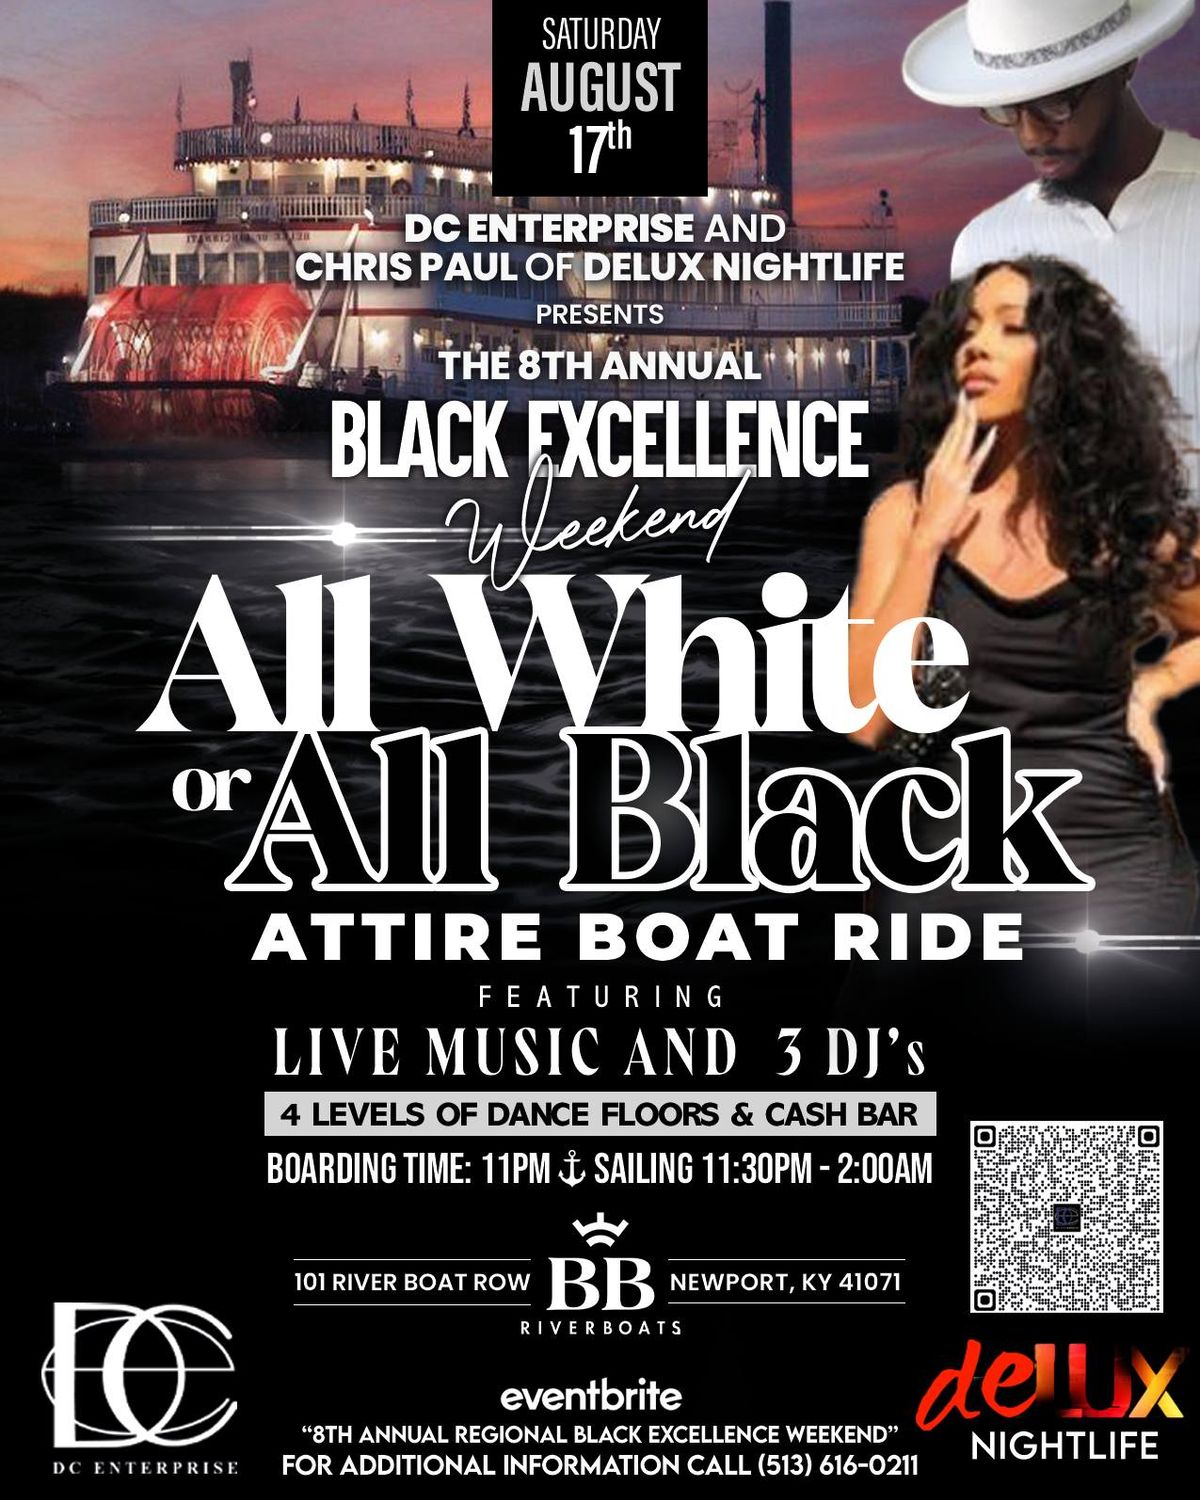 The 8th Black Excellence Wknd "ALL WHITE or BLACK" Boat Ride